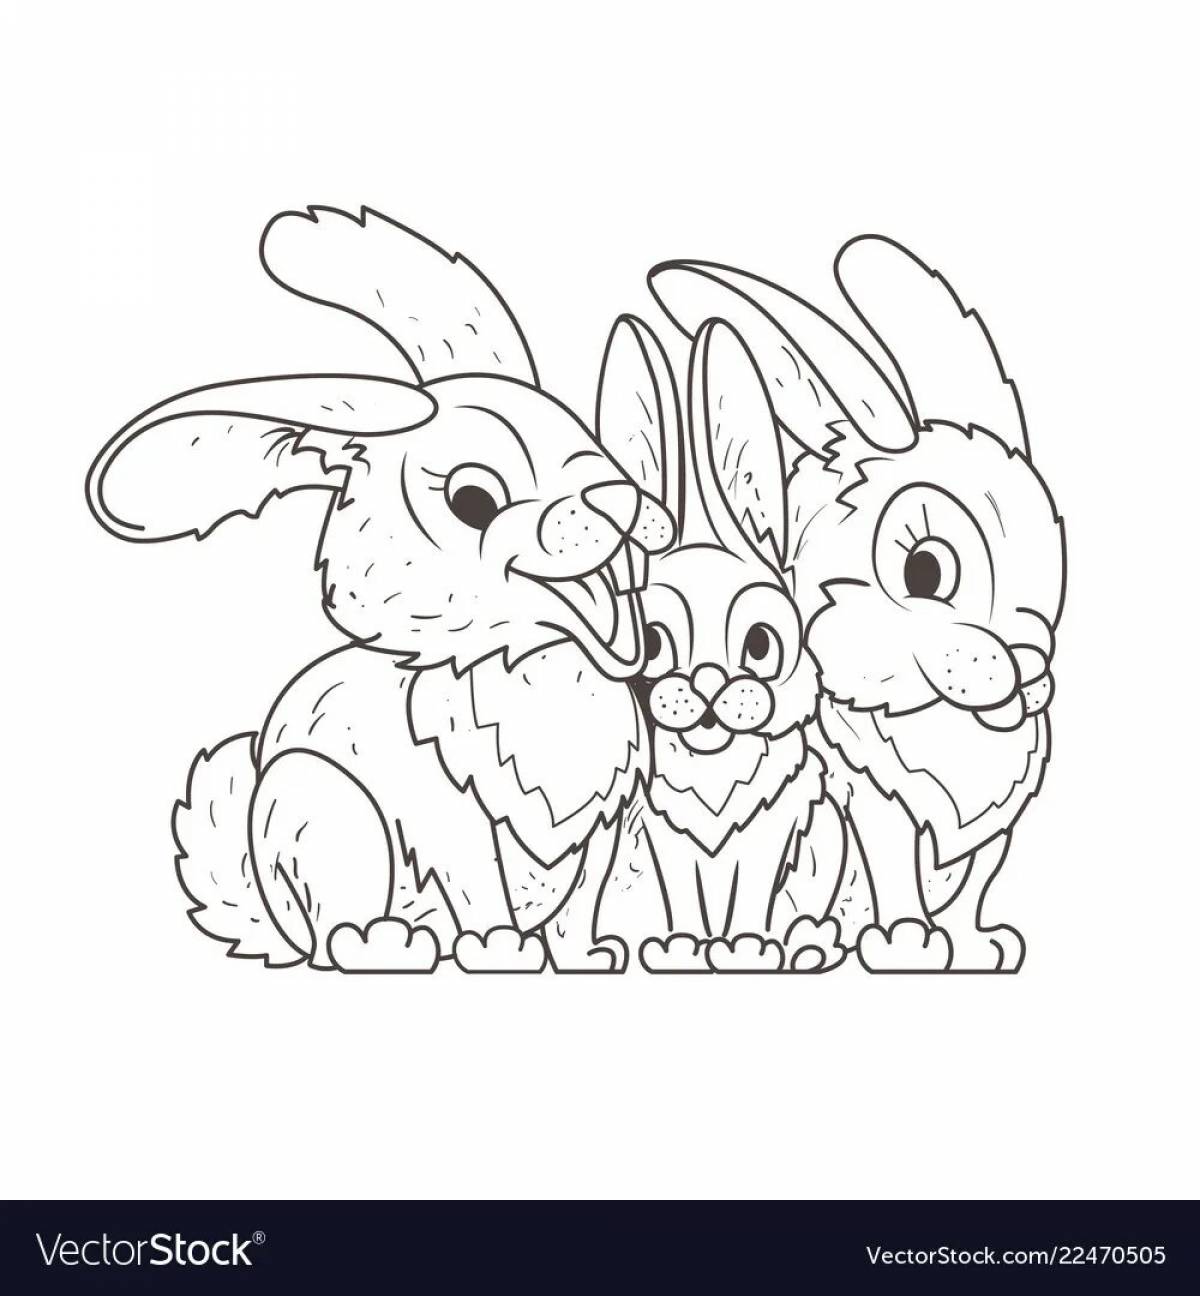 Devoted hare family